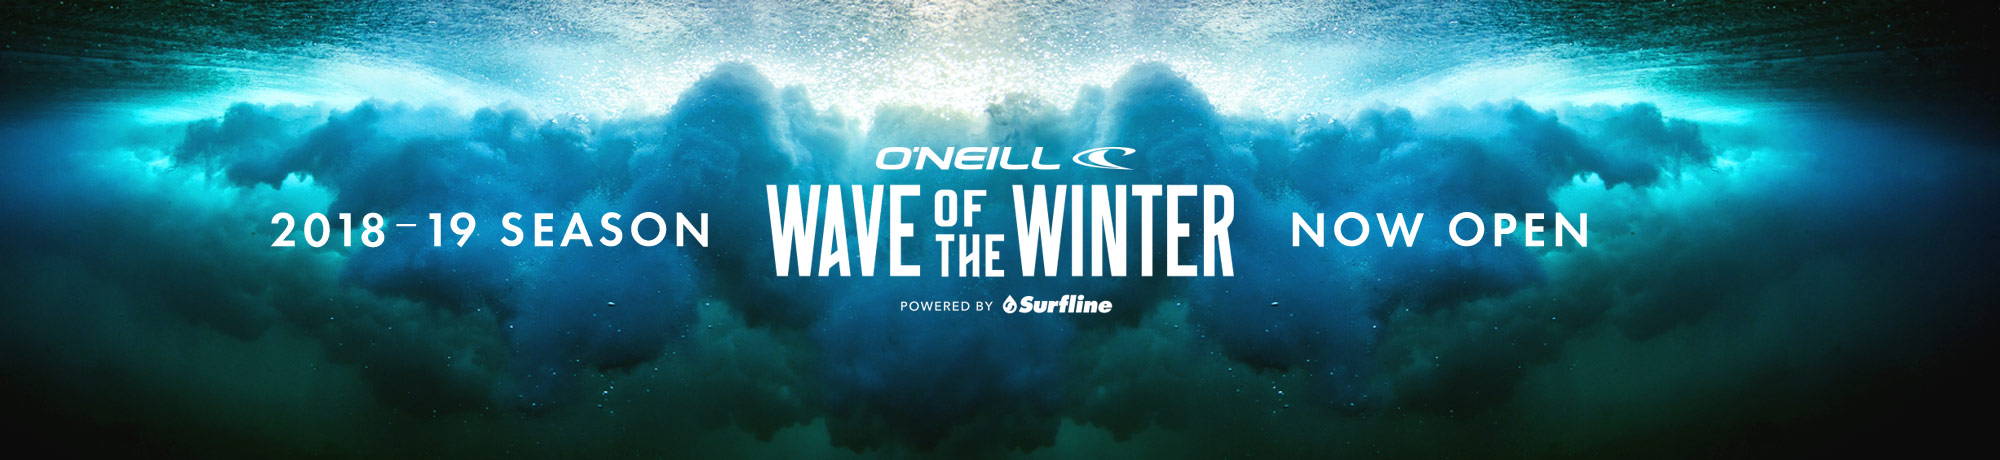 Wave of the Winter 2018/19